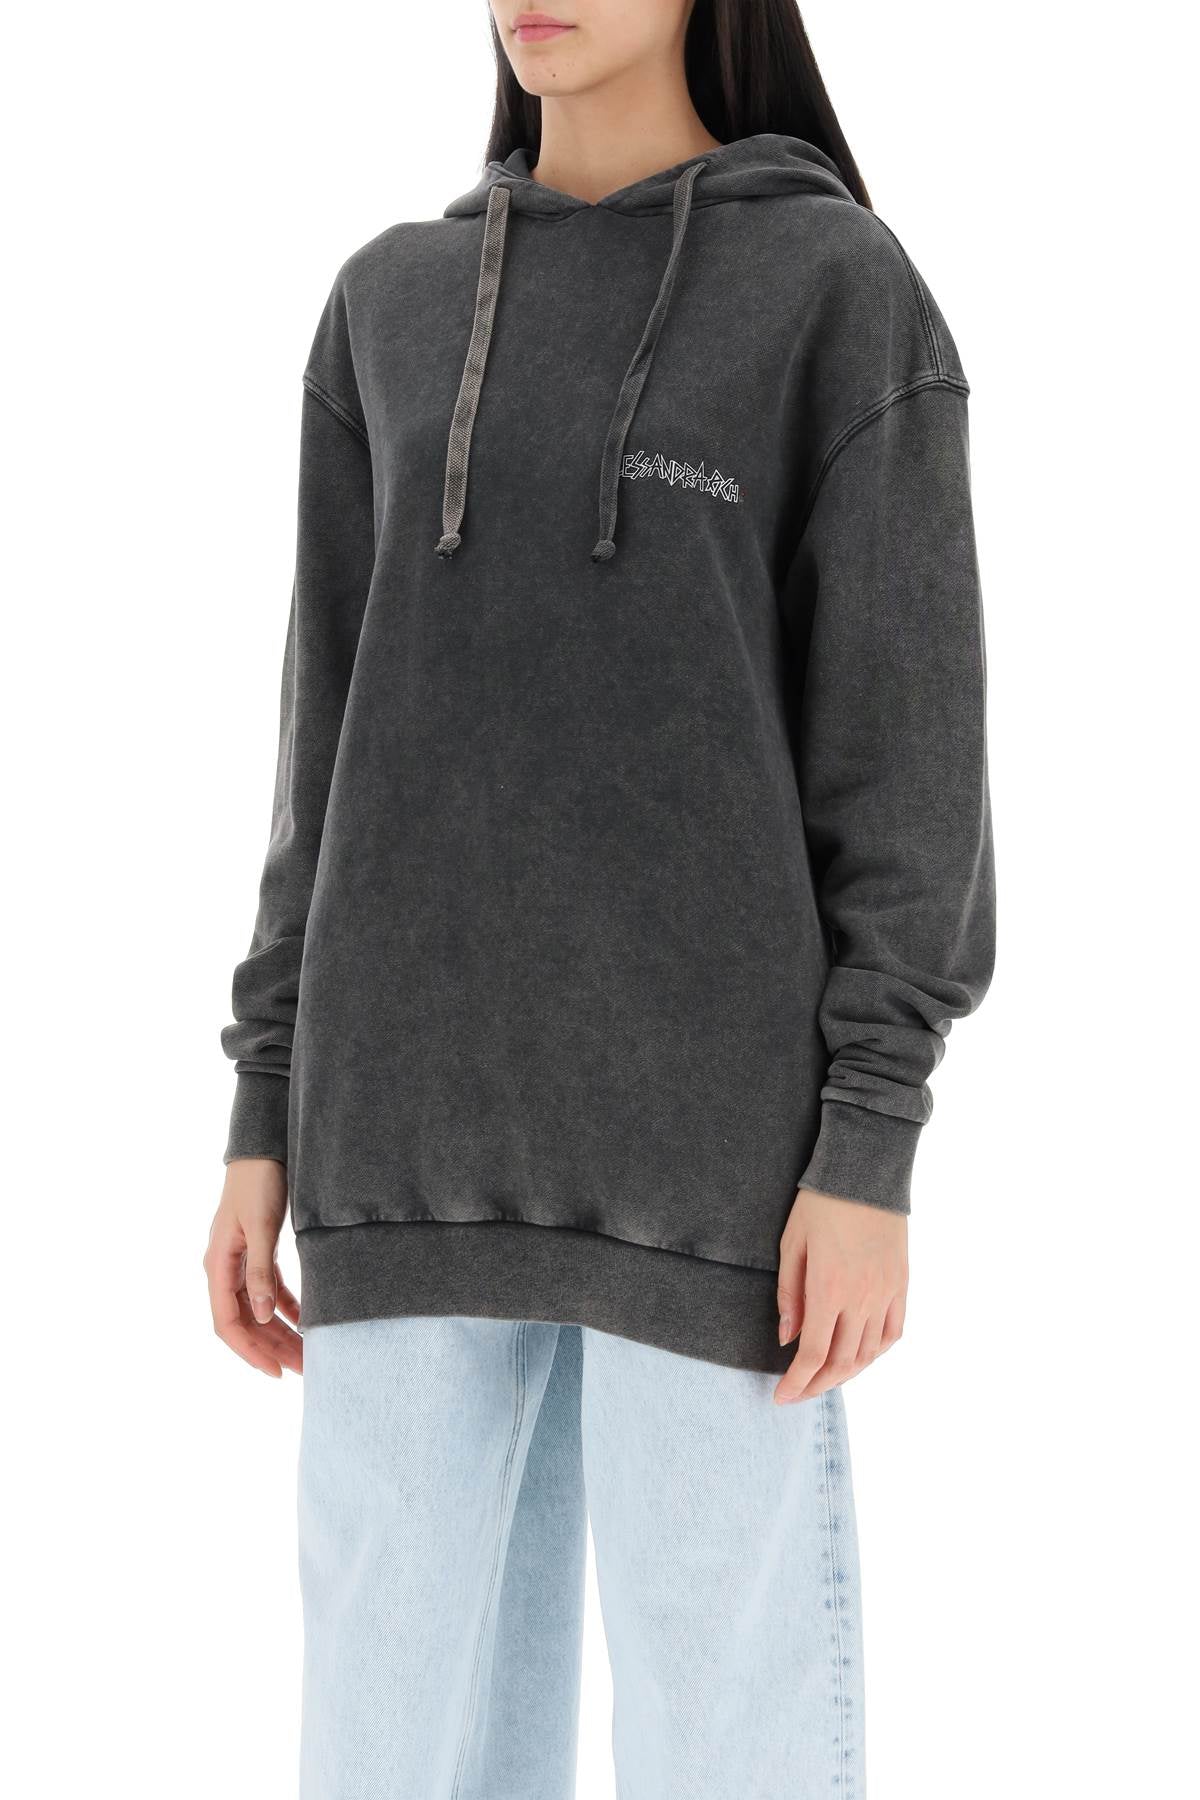 Alessandra rich oversized hoodie with print and rhinestones-3